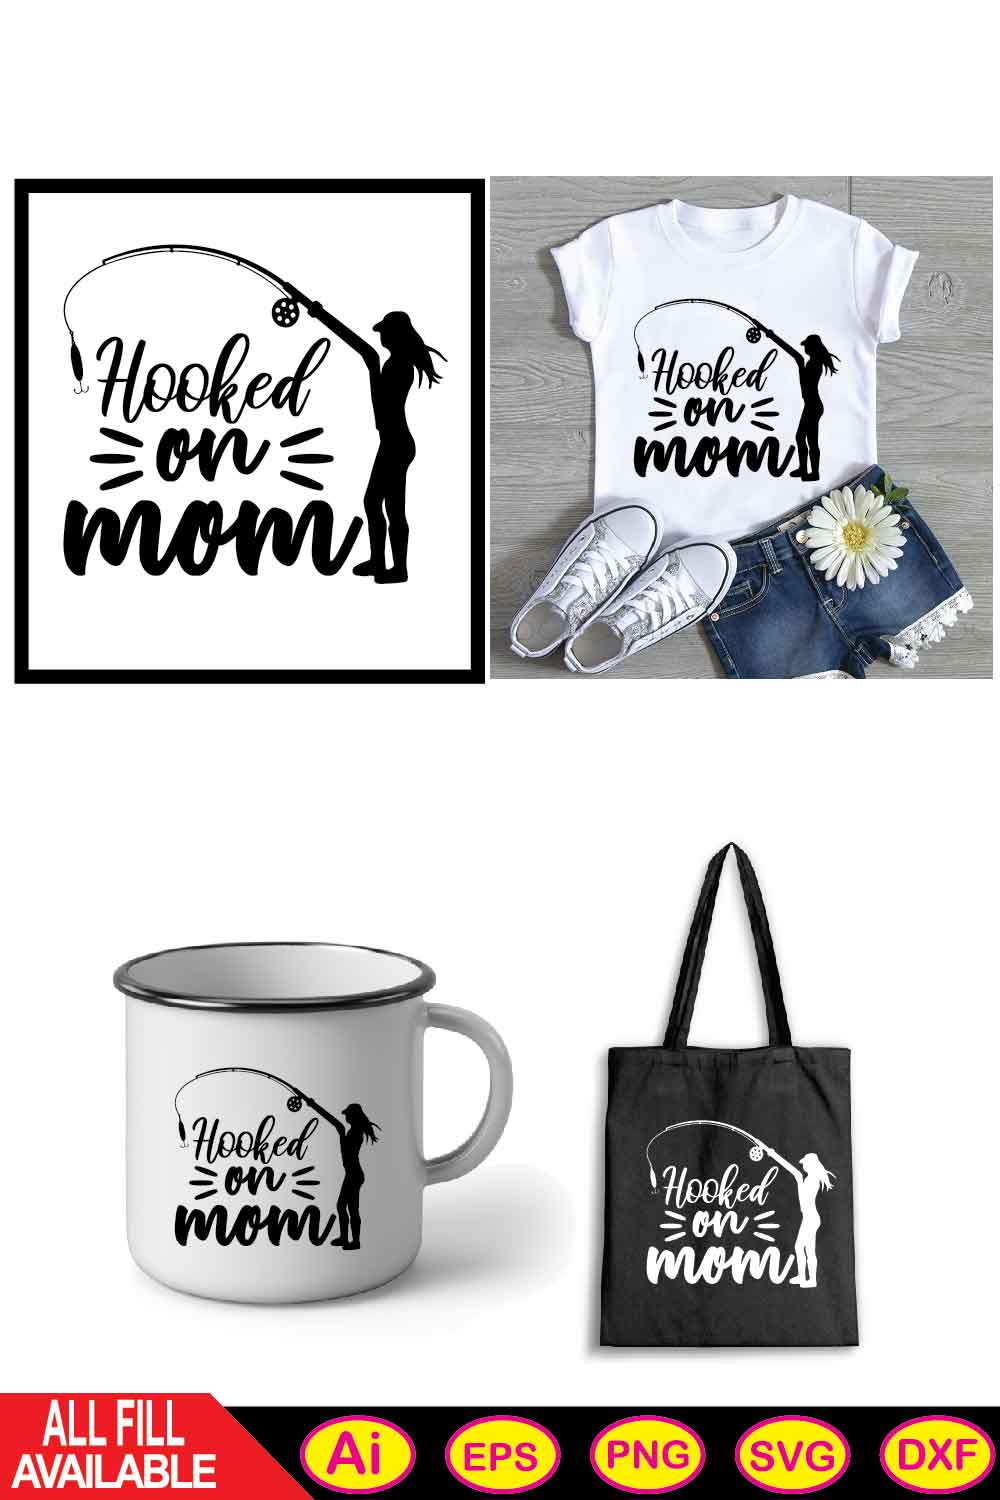 Hooked on mom svg t-shirt pinterest preview image.